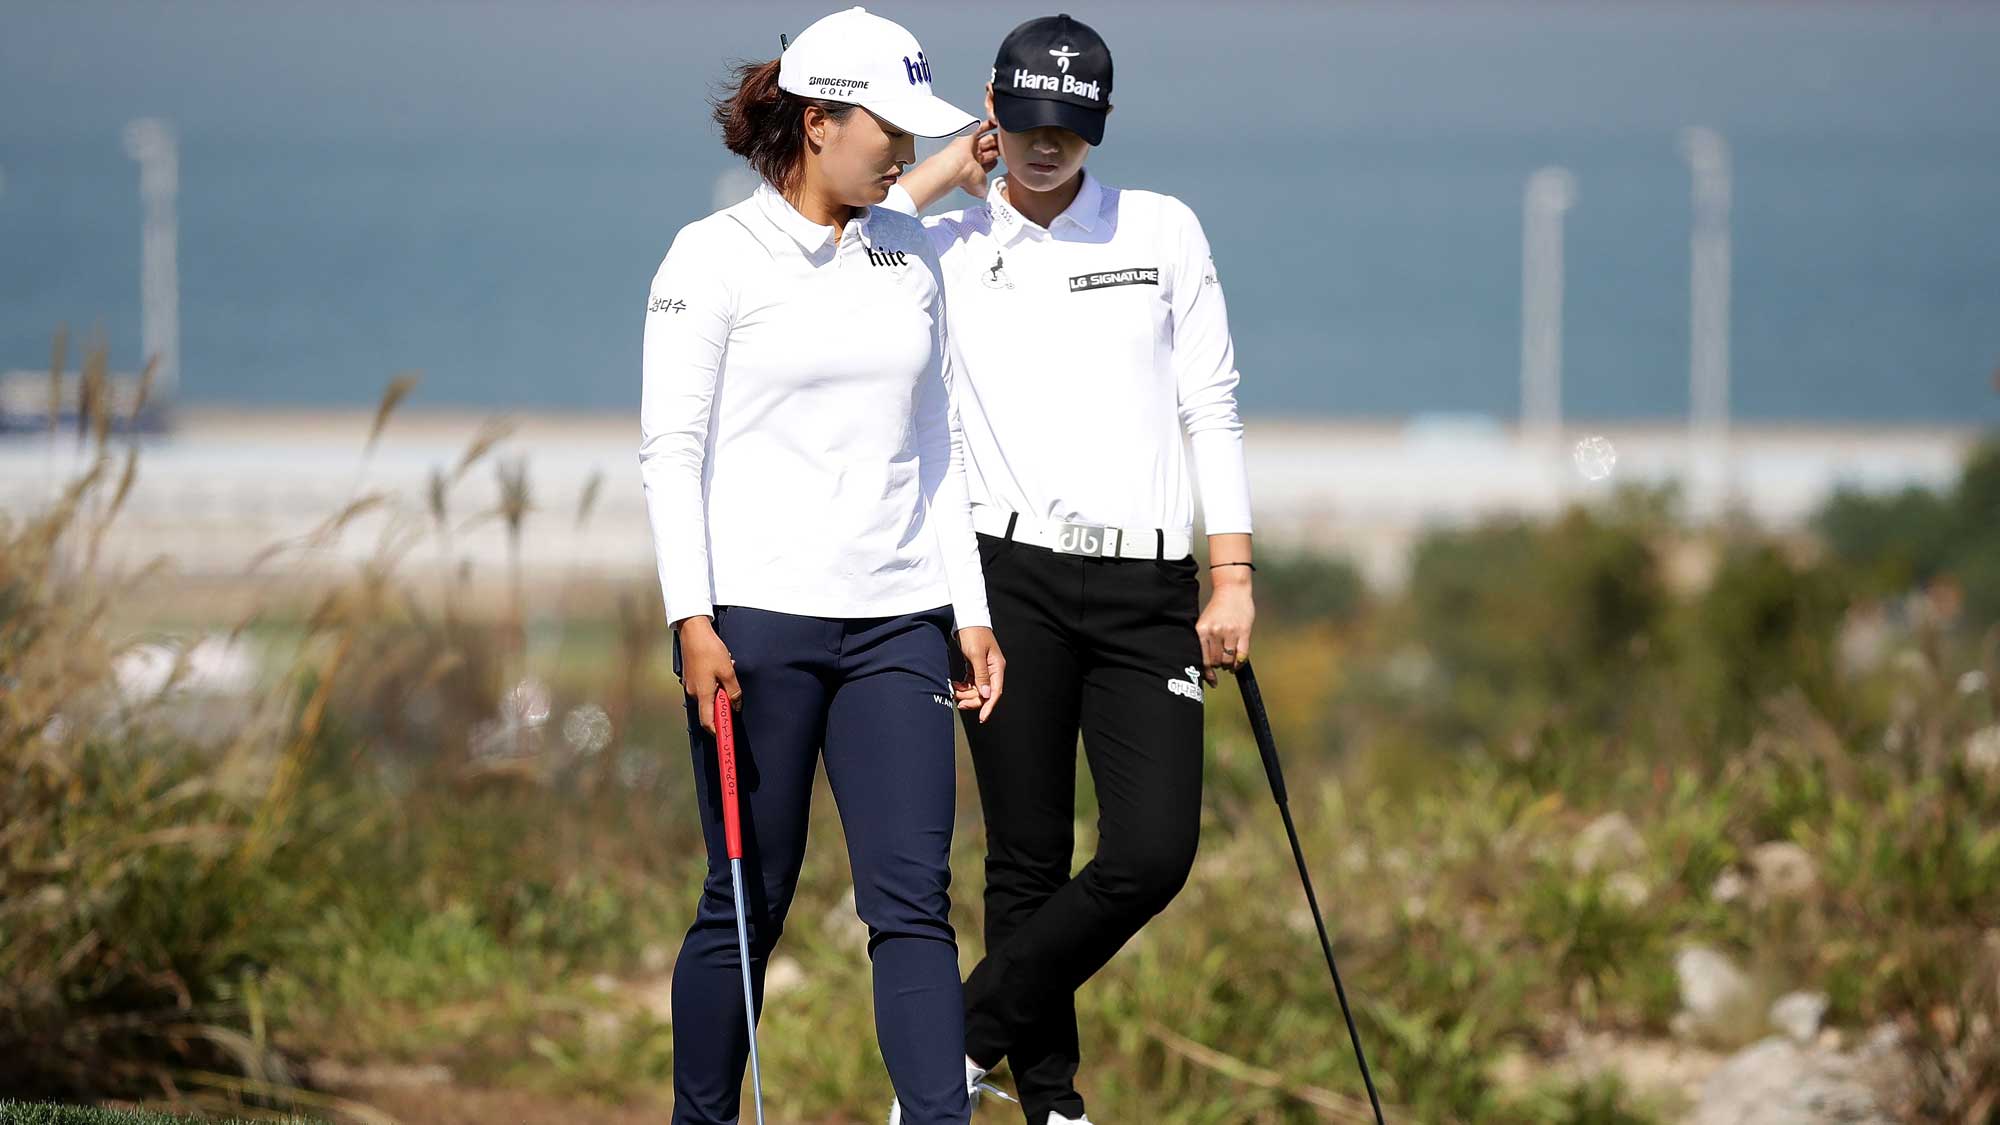 Jin-Young Ko (left) and Sung-Hyun Park of South Korea on the 6th green during the final round of the LPGA KEB Hana Bank Championship